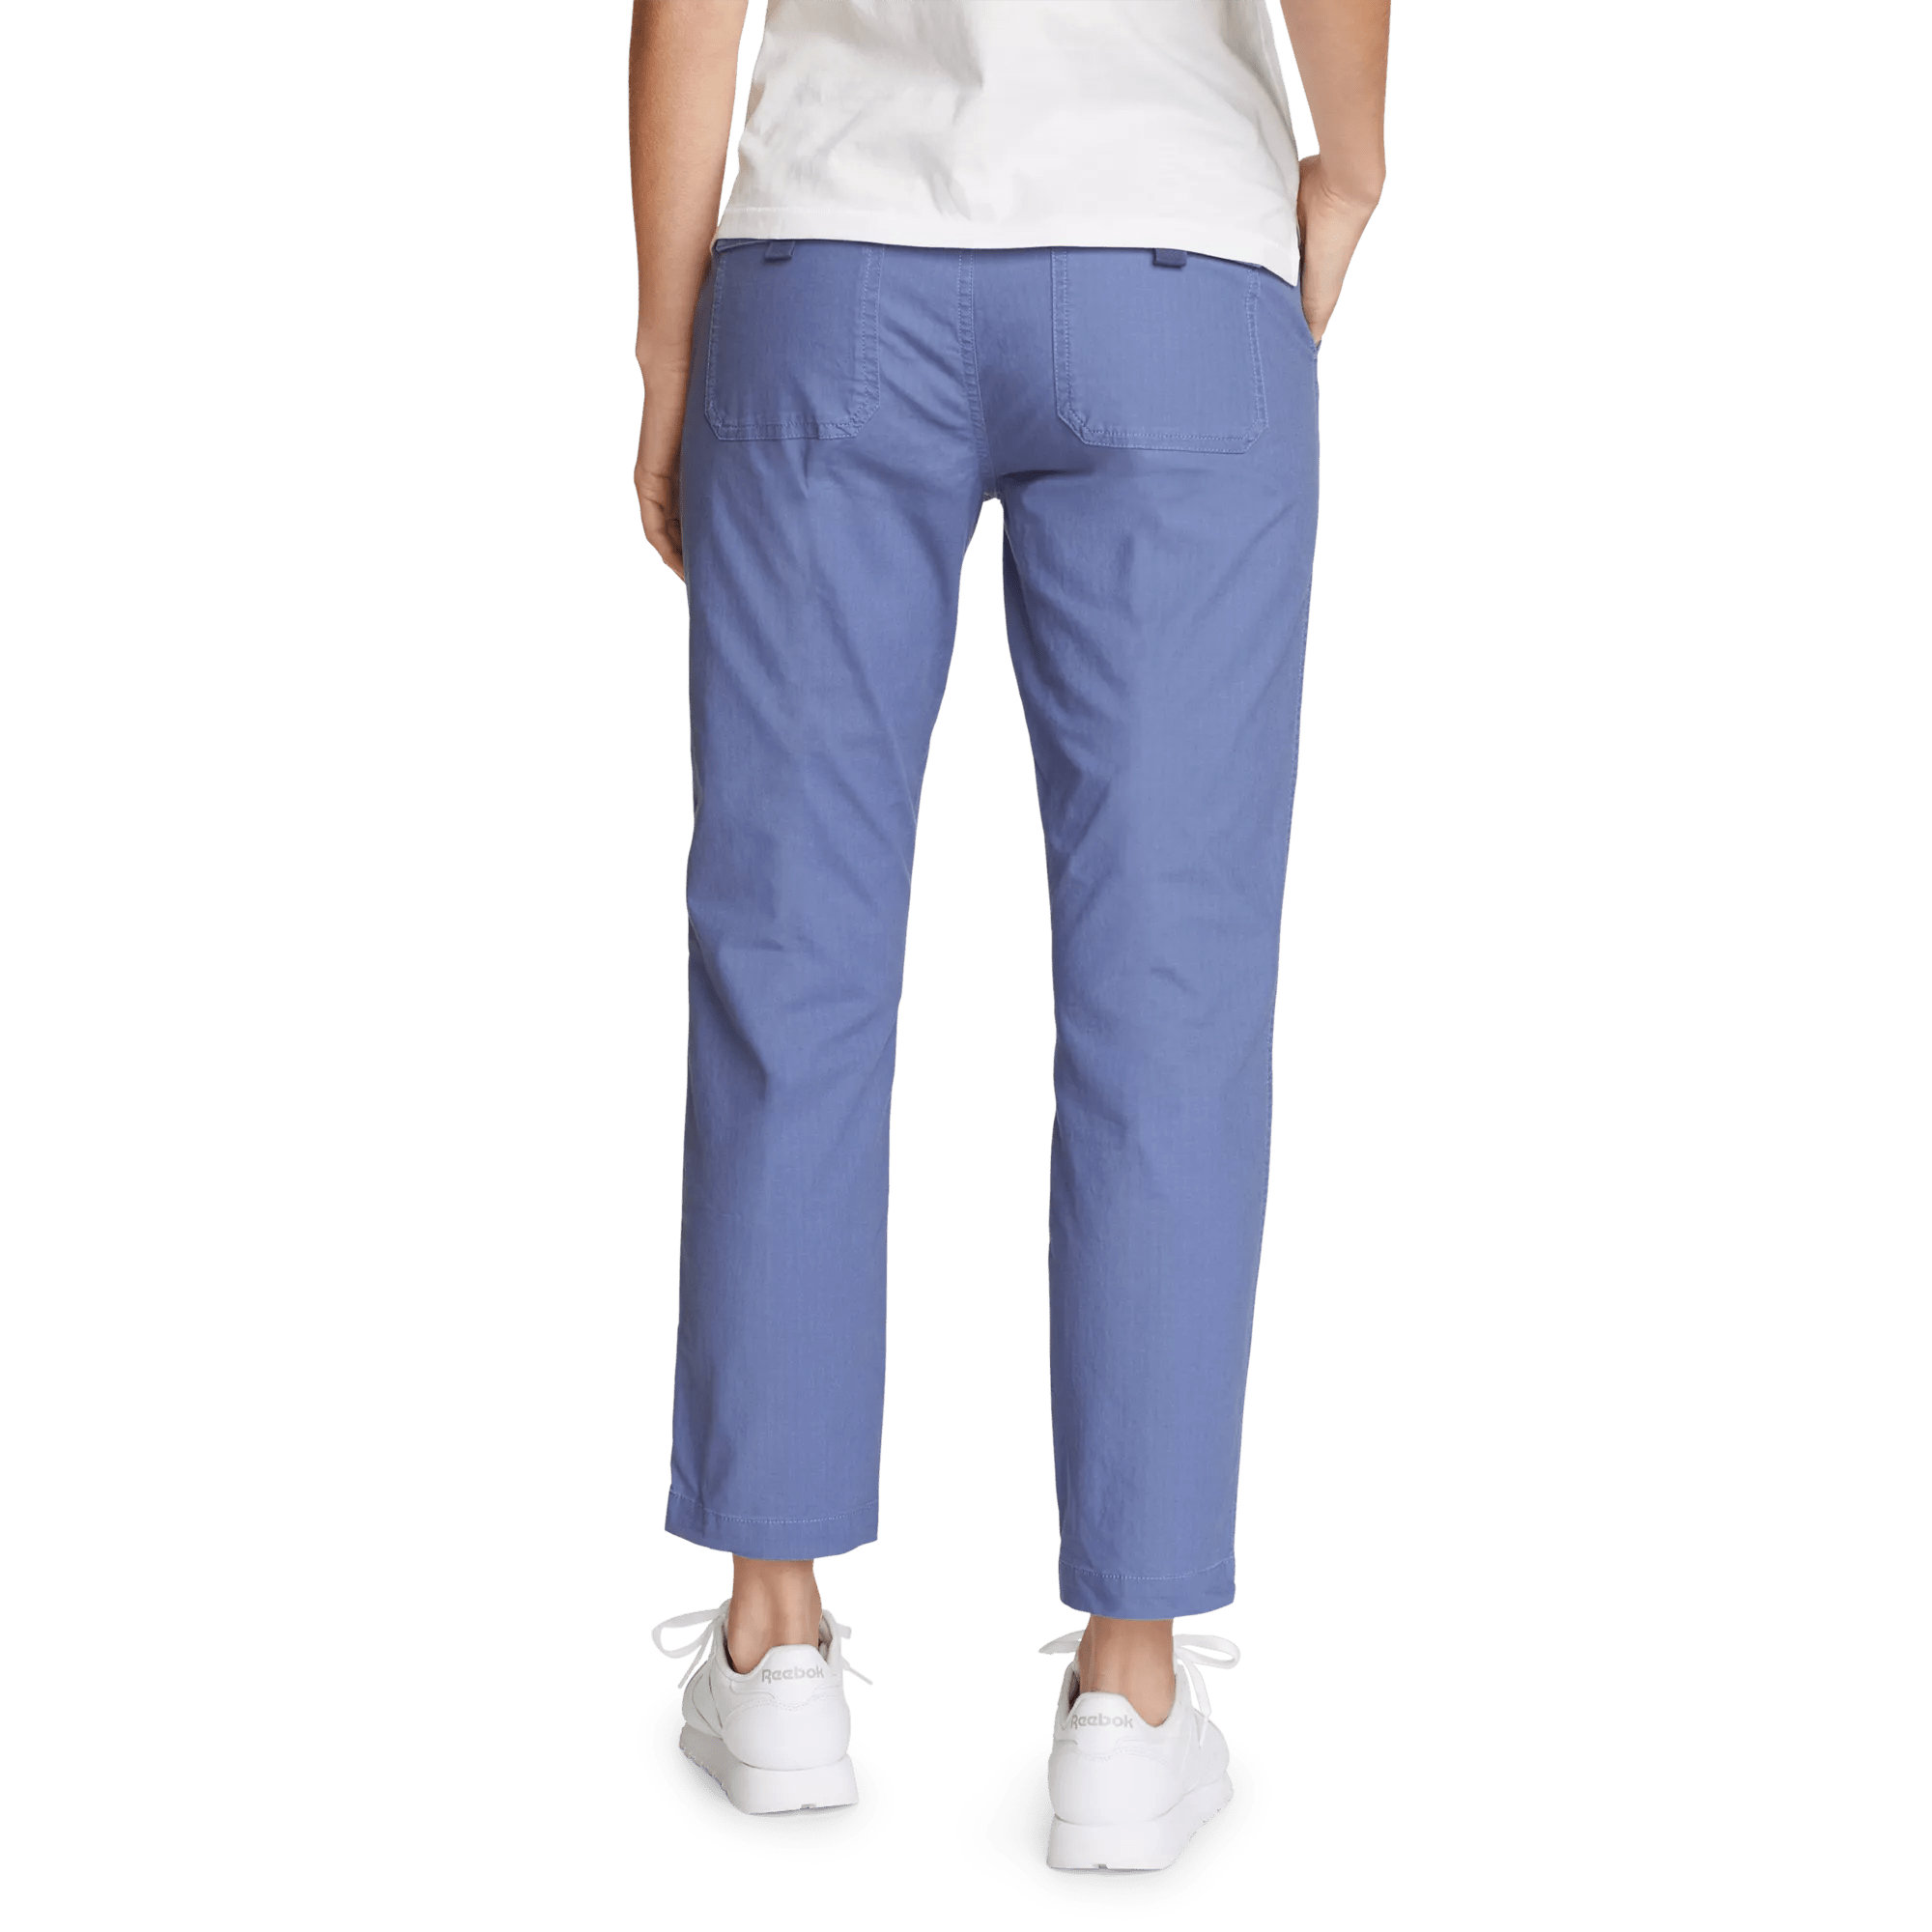 Adventurer® Stretch Ripstop Ankle Pants